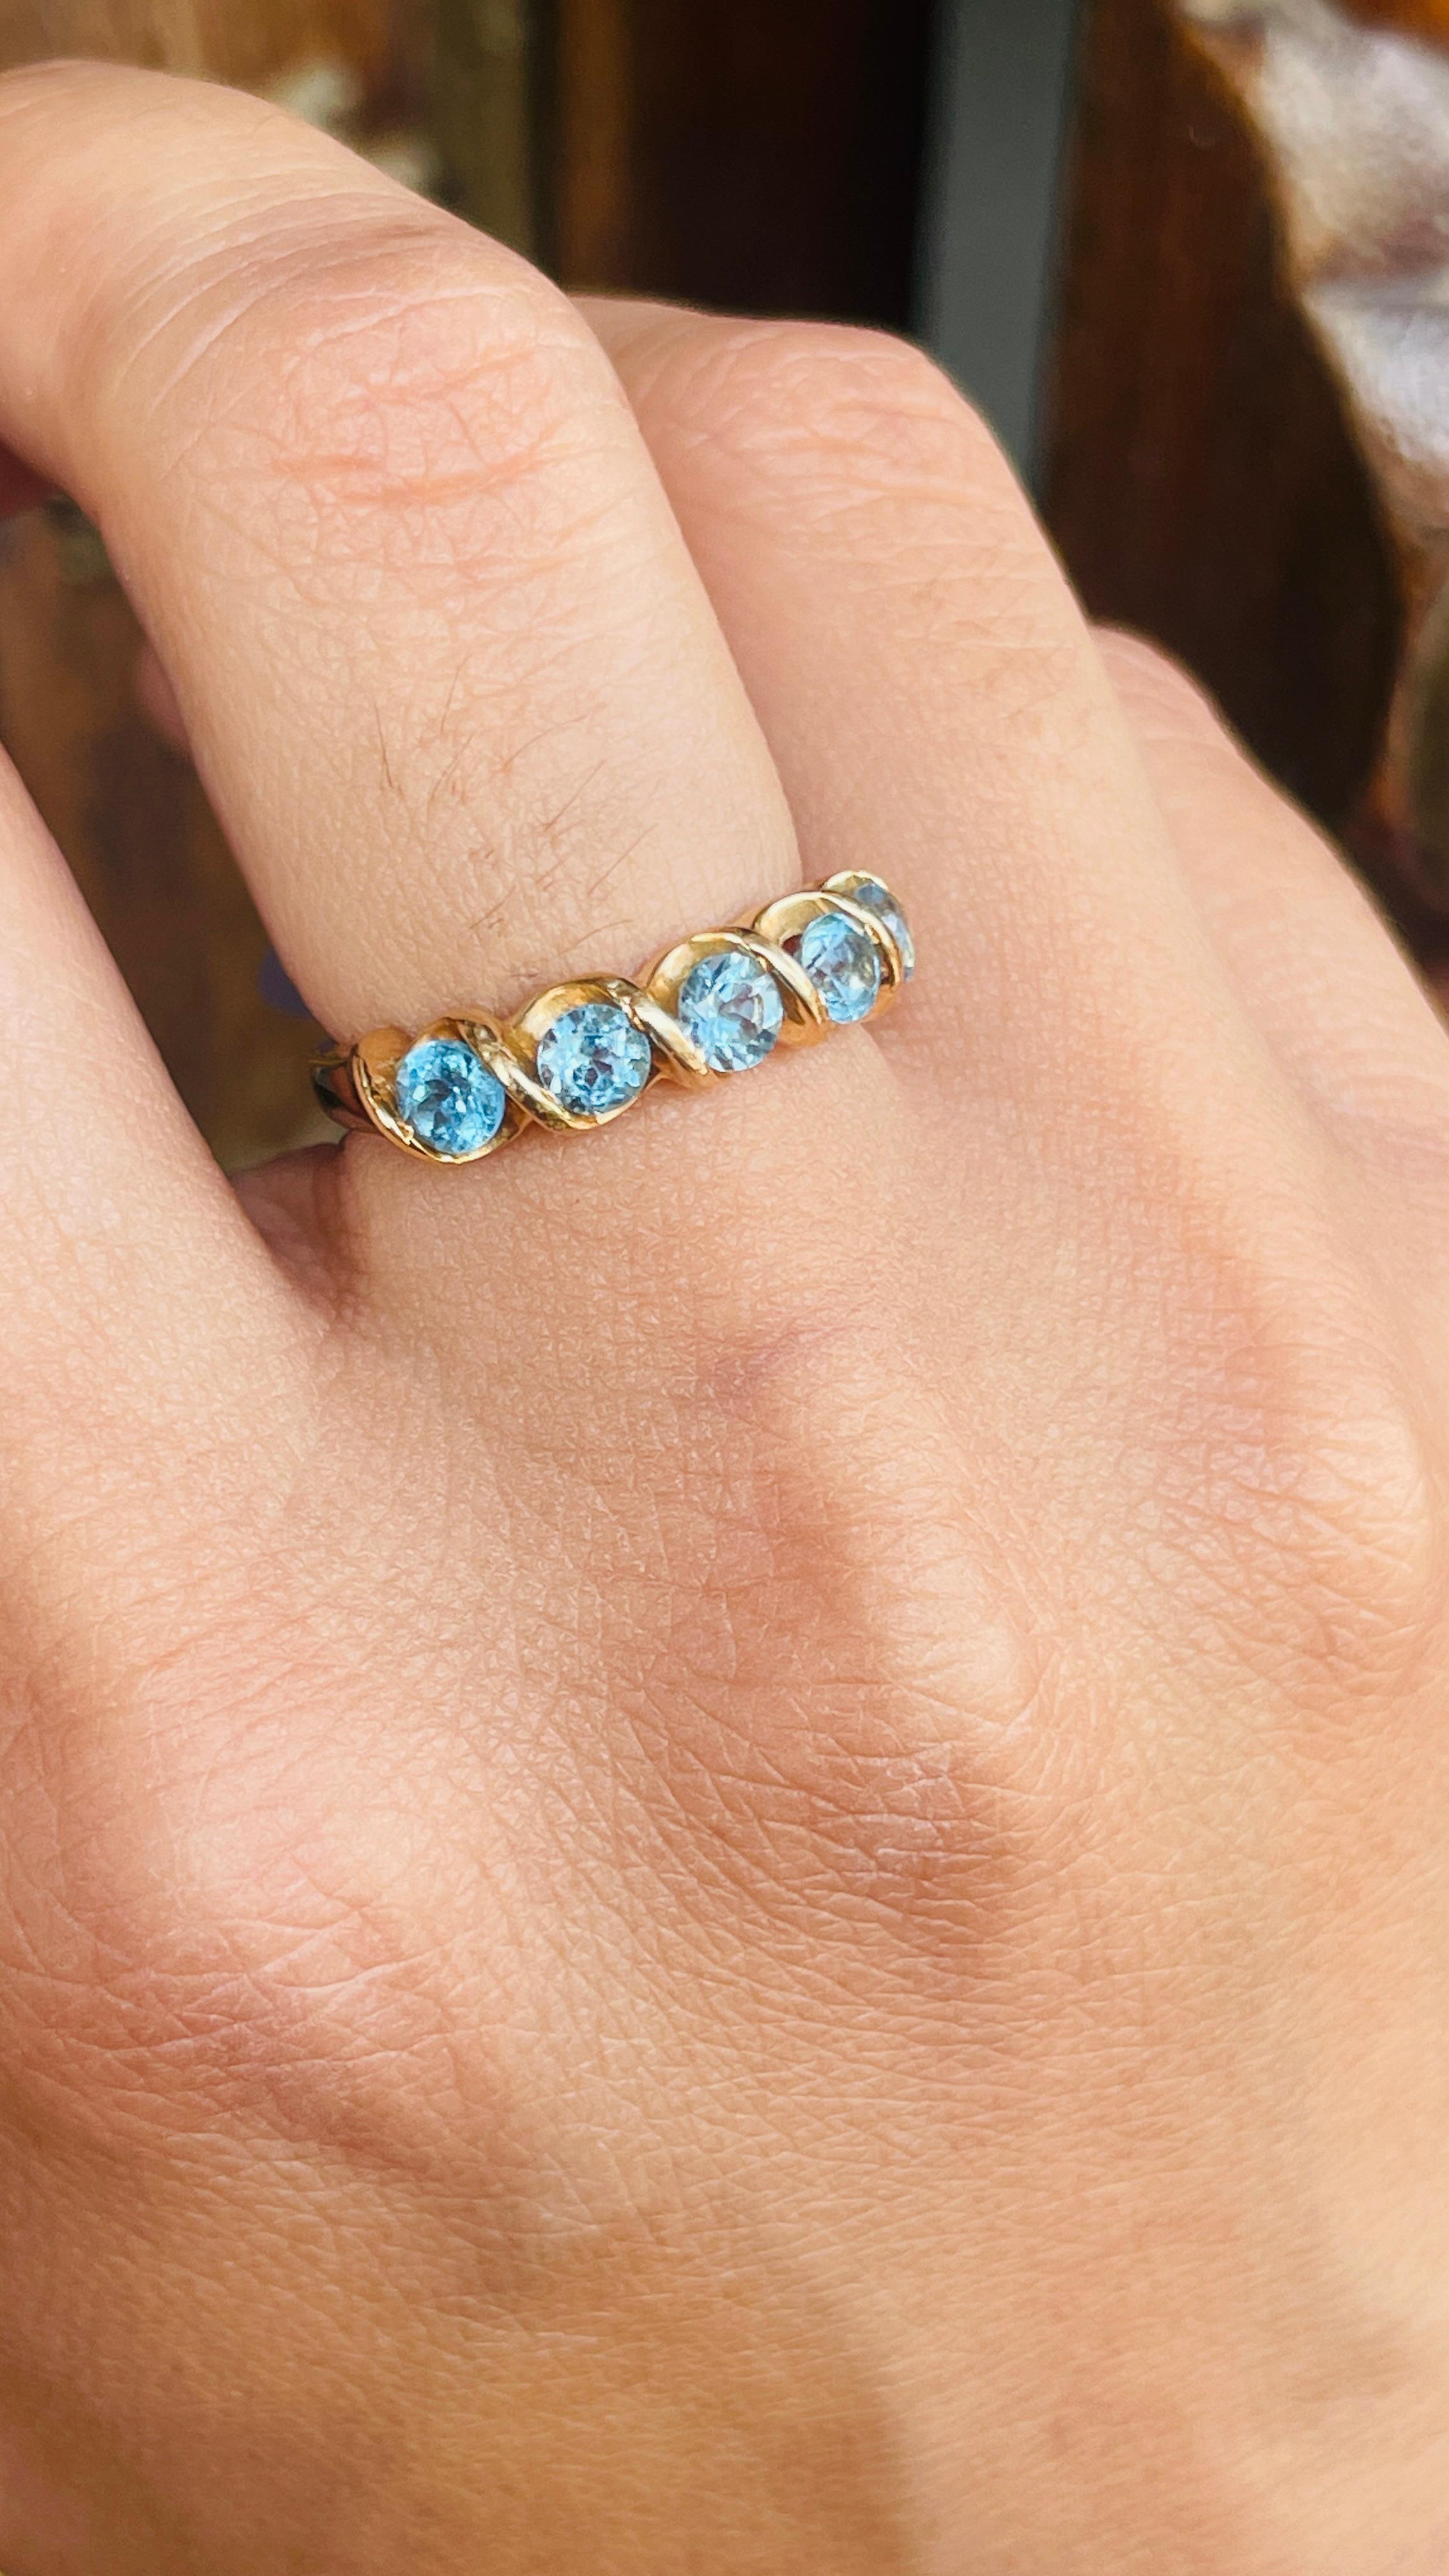 For Sale:  Blue Topaz Band Ring in 14k Solid Yellow Gold, December Birthstone Band 11